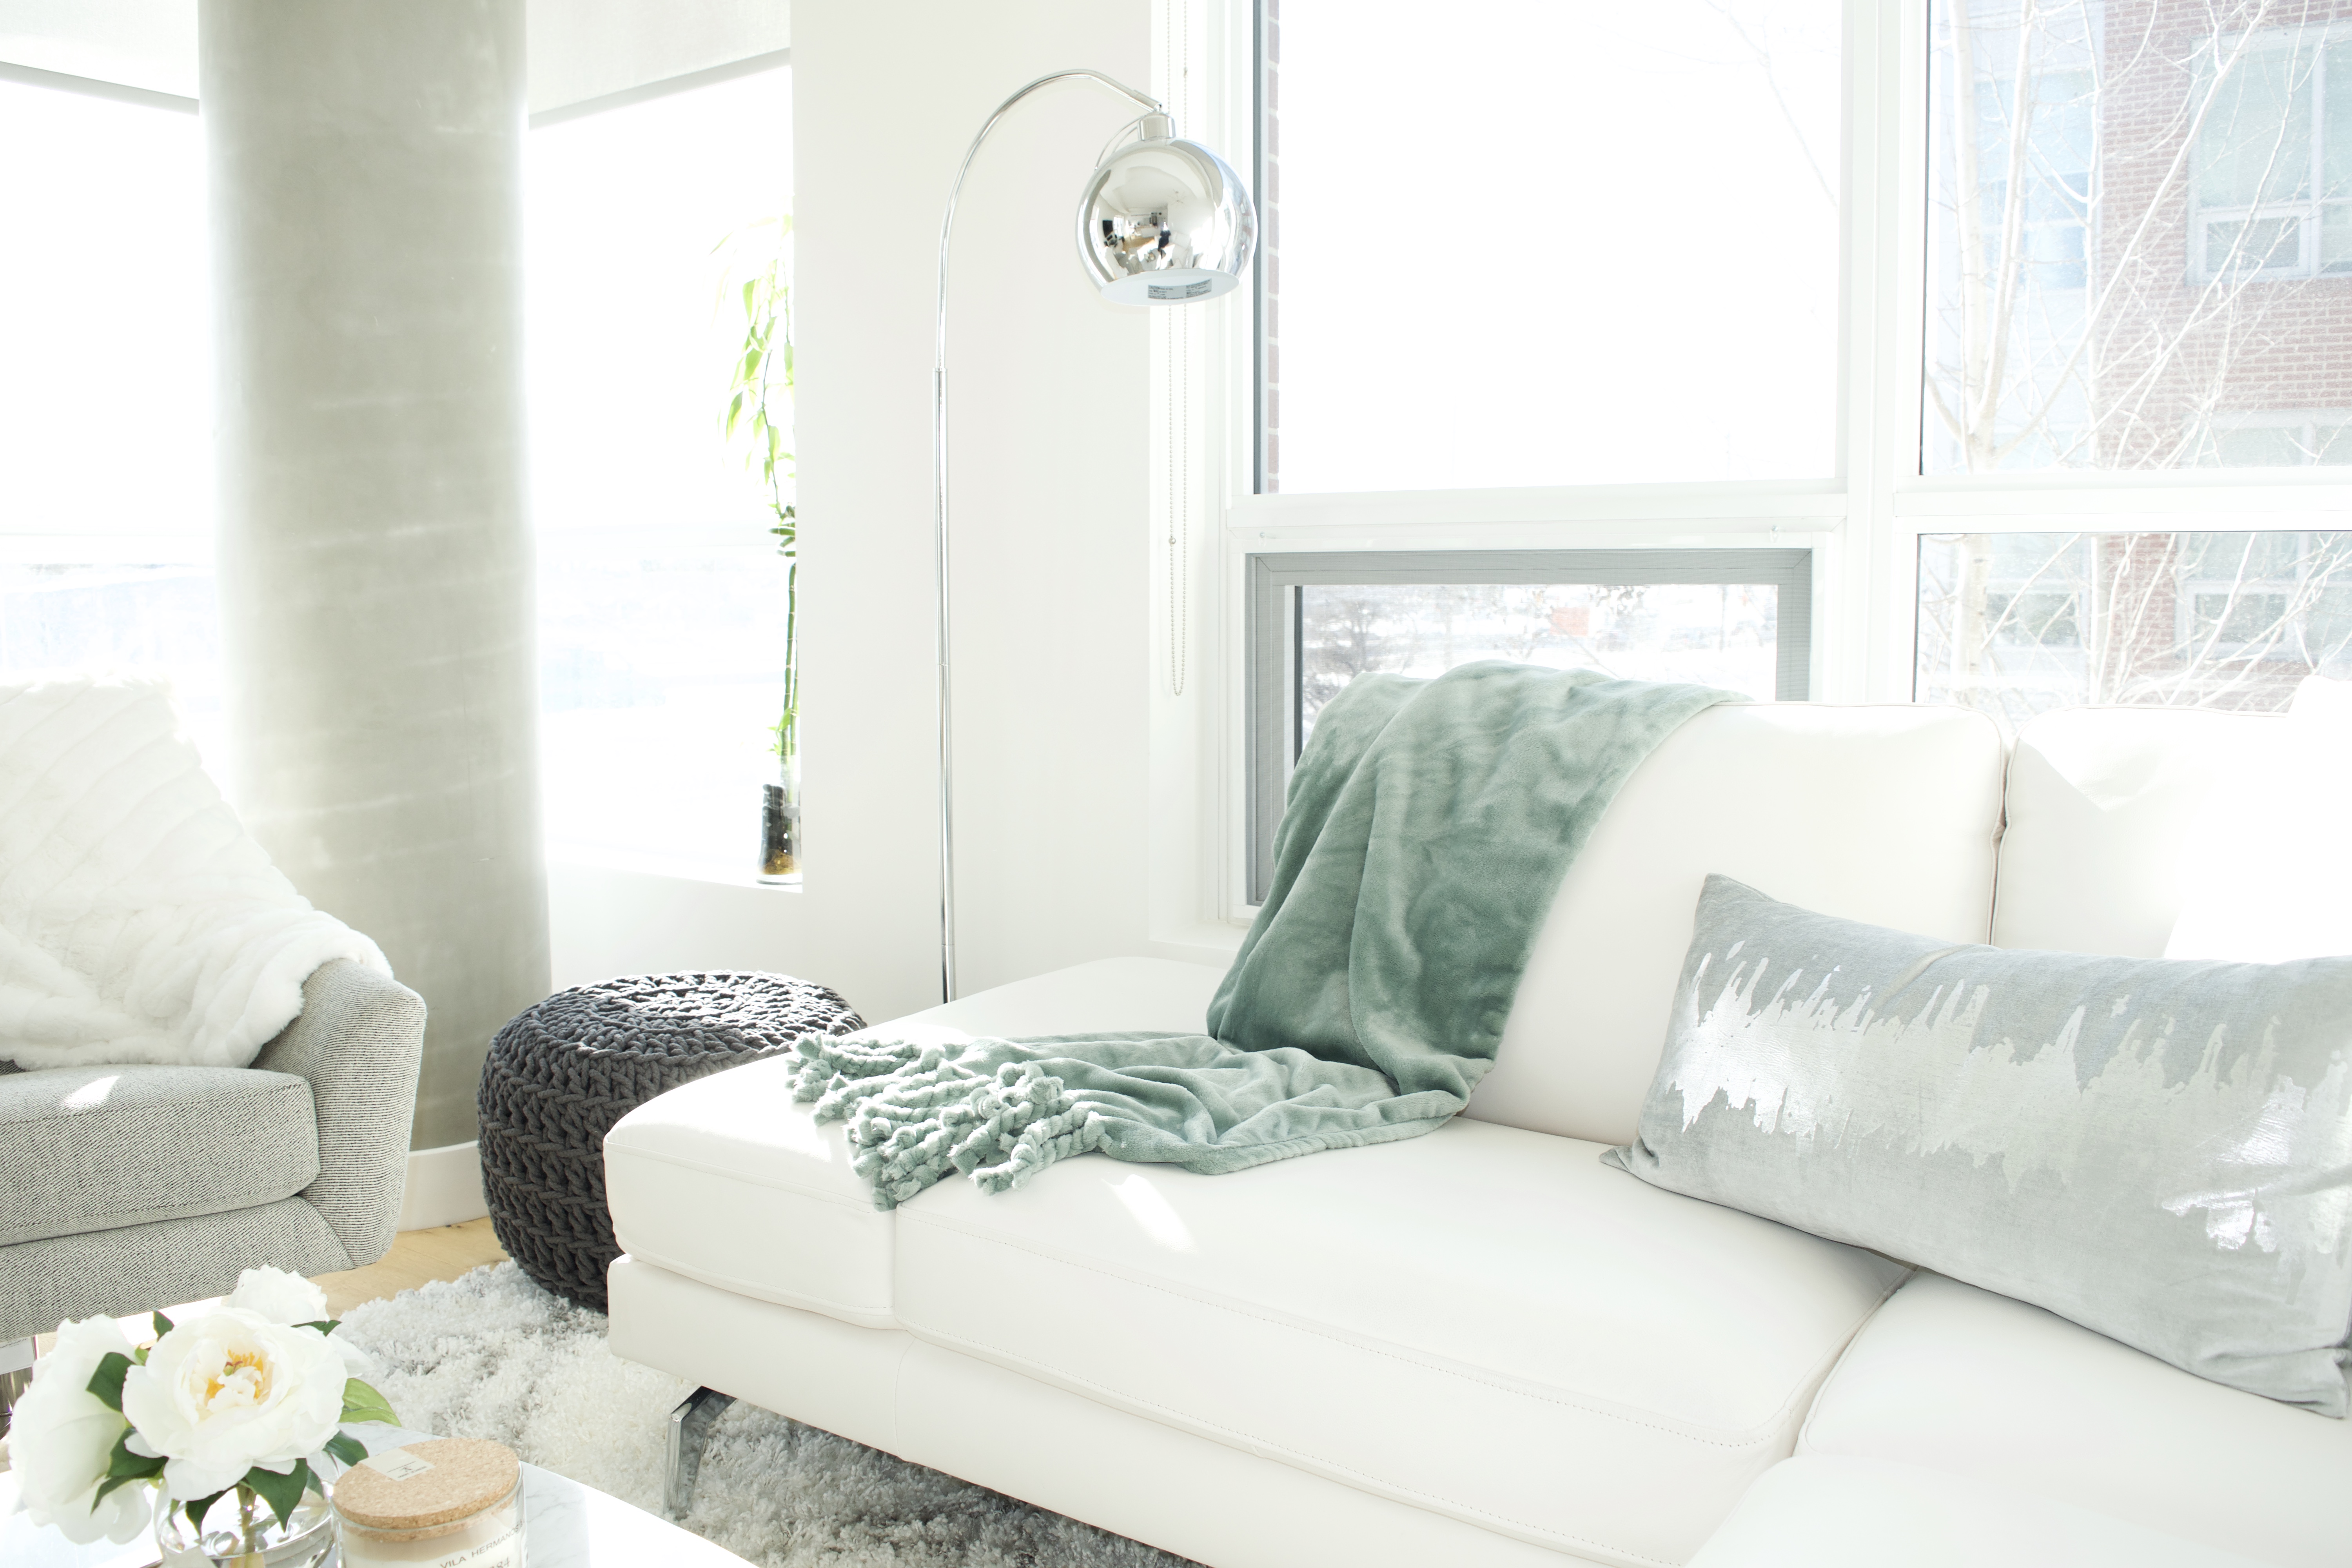 modern scandinavian scandi glam white grey black ivory concrete pillar design swivel chair sectional silver decor living room apartment small space marble table white leather sectional seafoam green pastel soft bright white paint calgary interior designer home by freya maclean pouf ottoman knit arc lamp leather couch corner pillows tassel blanket